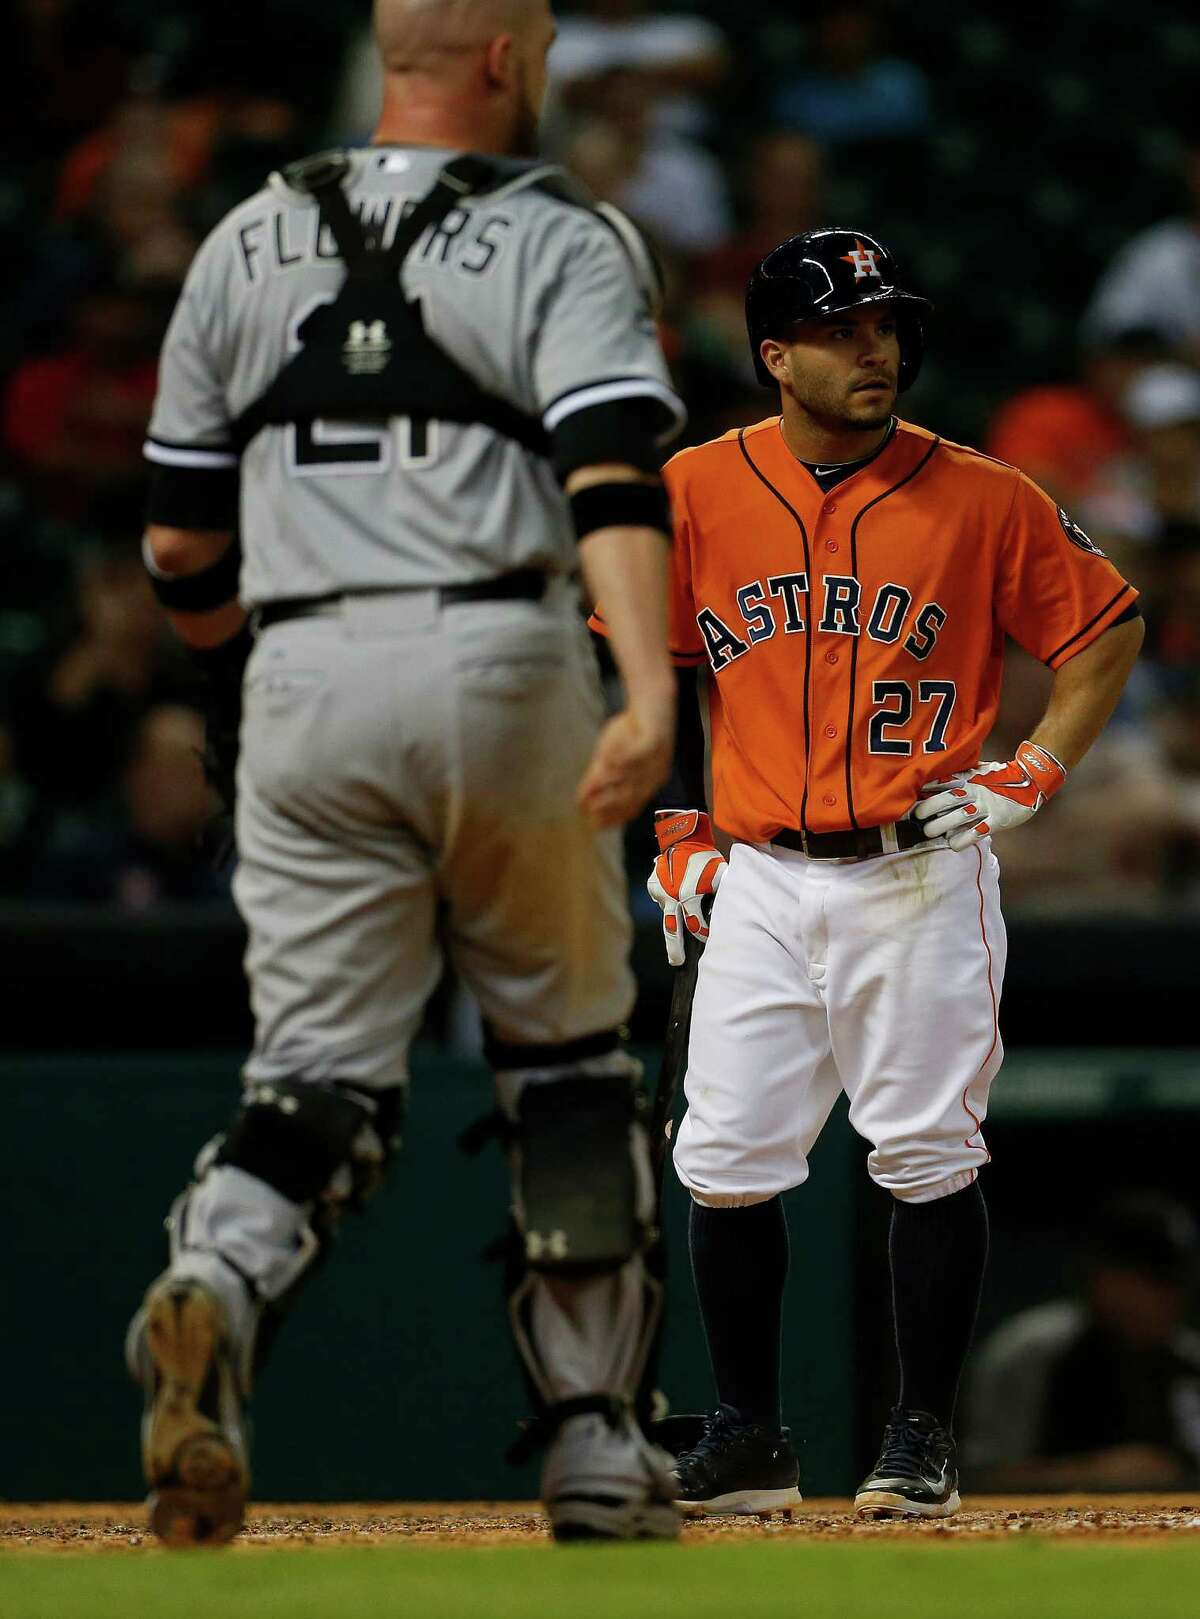 Jose Altuve, right, doesn't like what he sees after popping up to Chicago's Tyler Flowers.